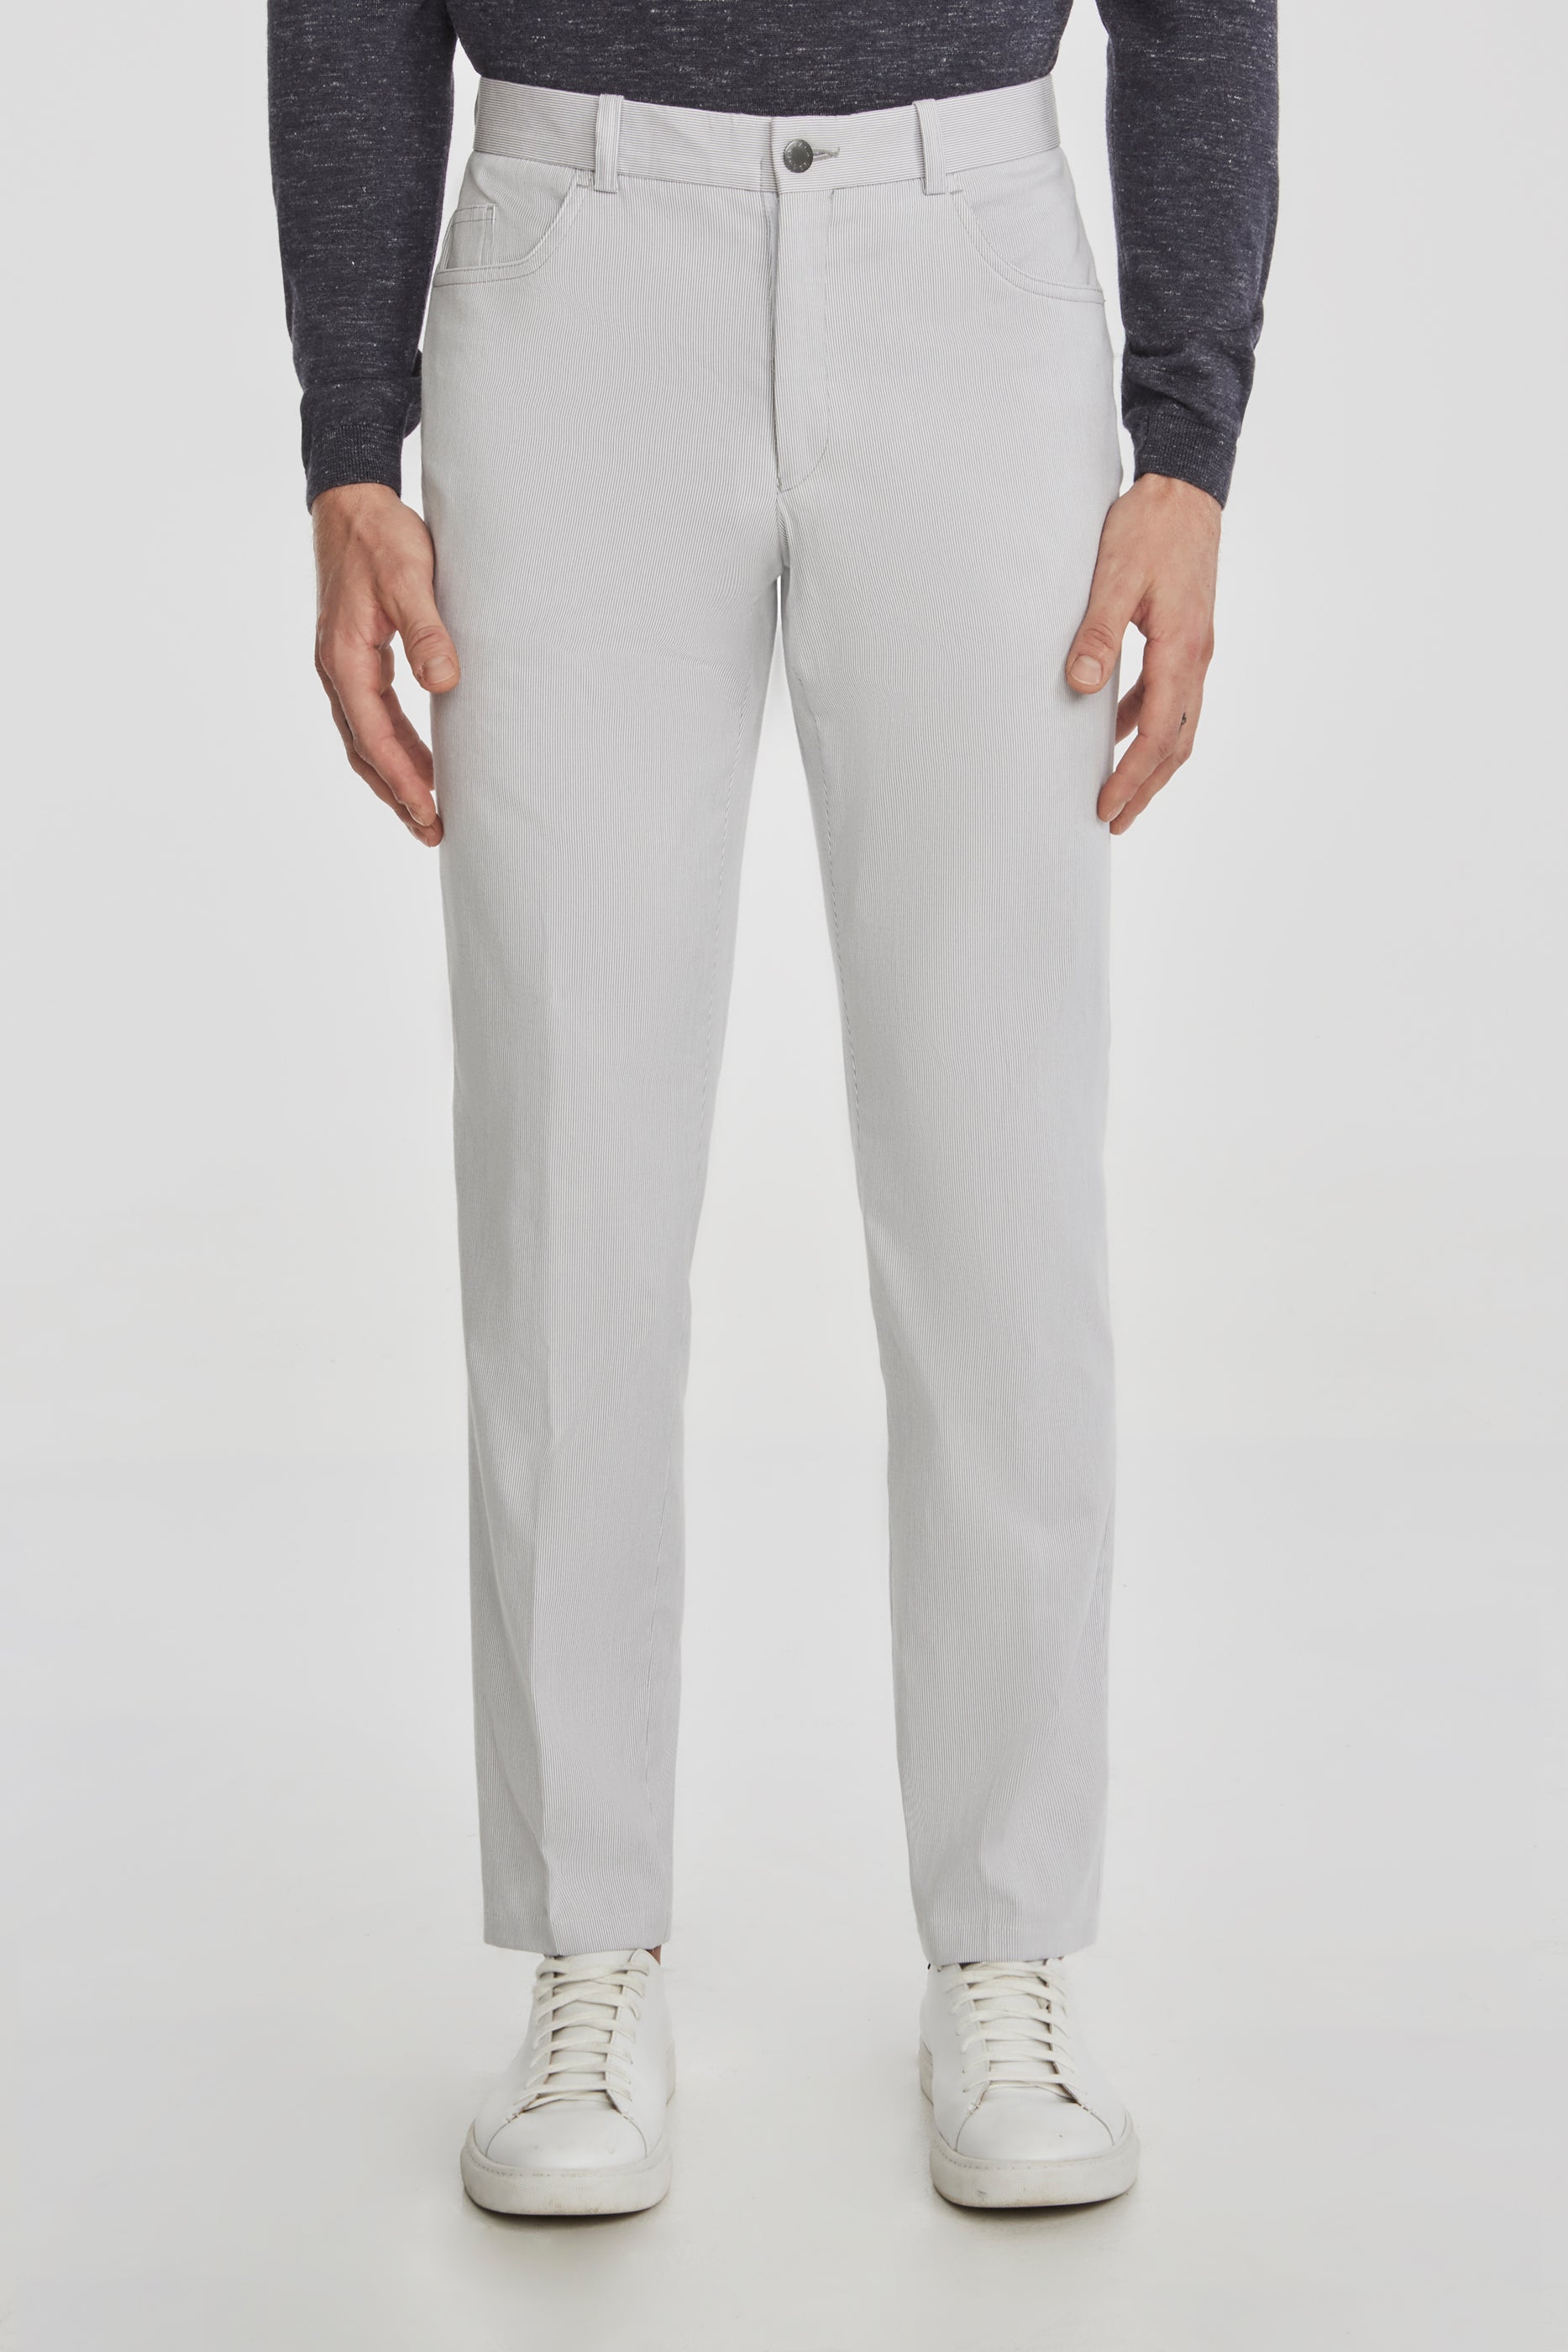 Alt view 1 Pinfeather Sage 5-Pocket Stretch Cotton Pant in Light Grey